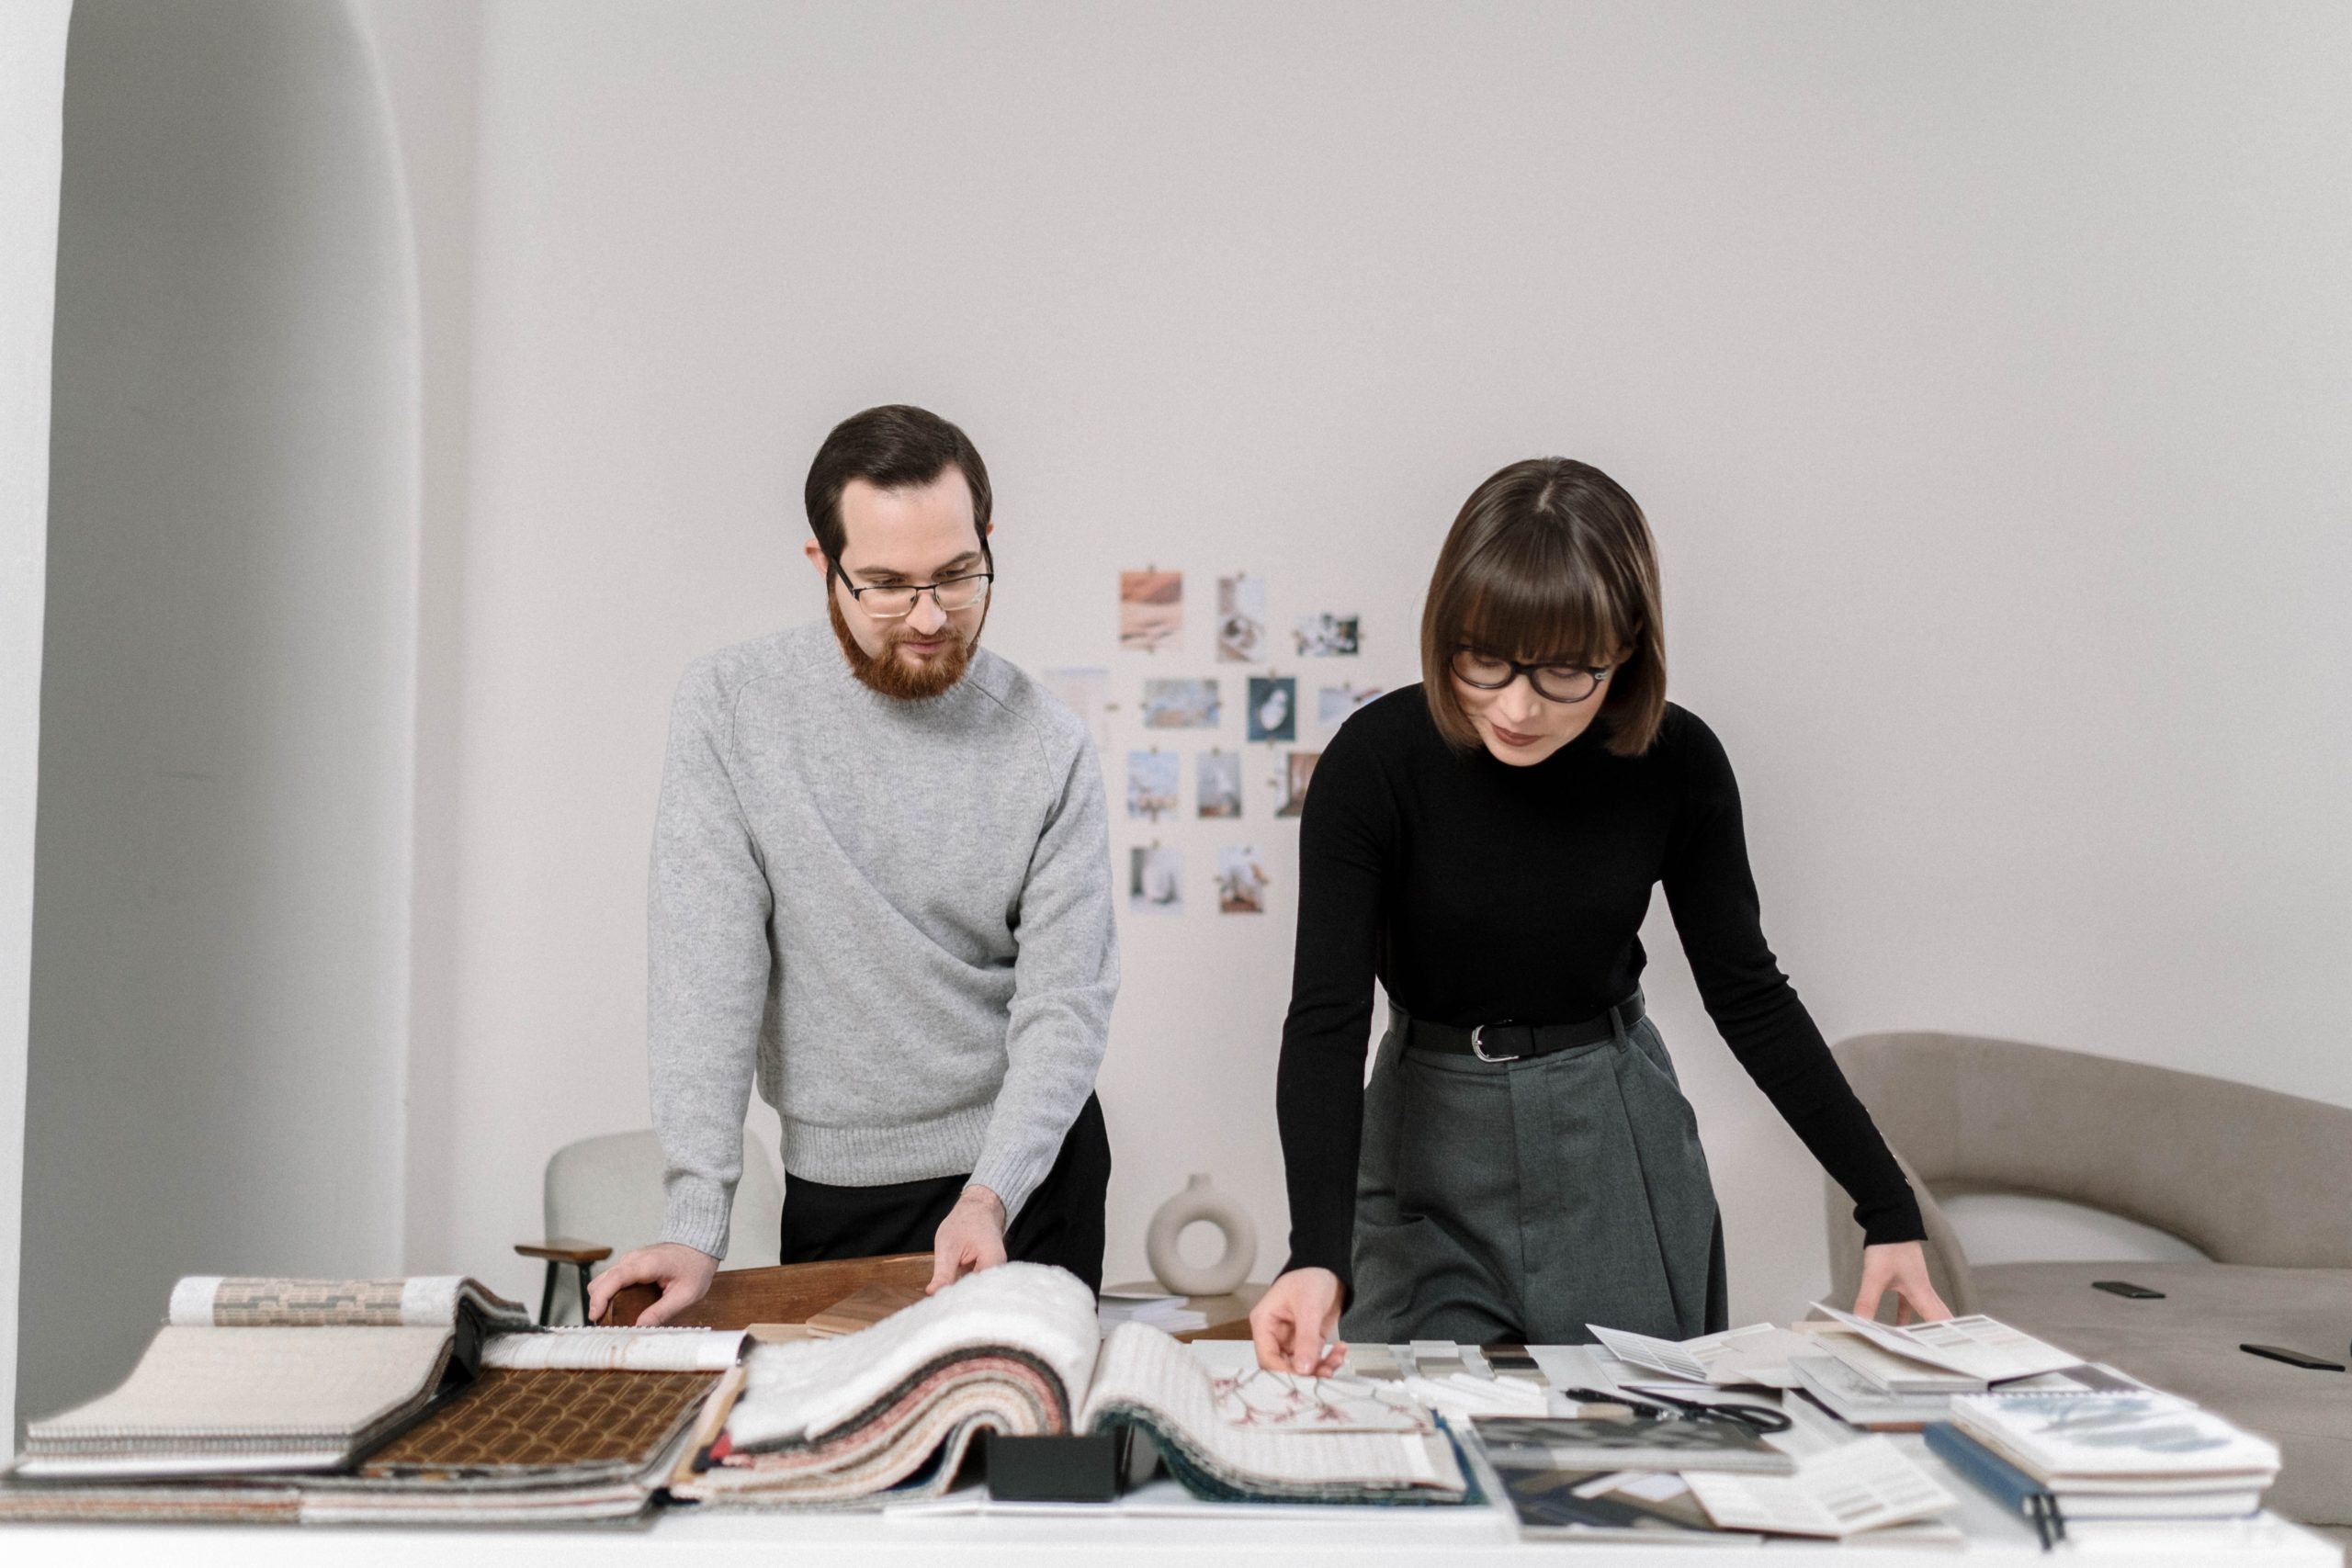 A man and a woman look at fabric swatches at a desk.